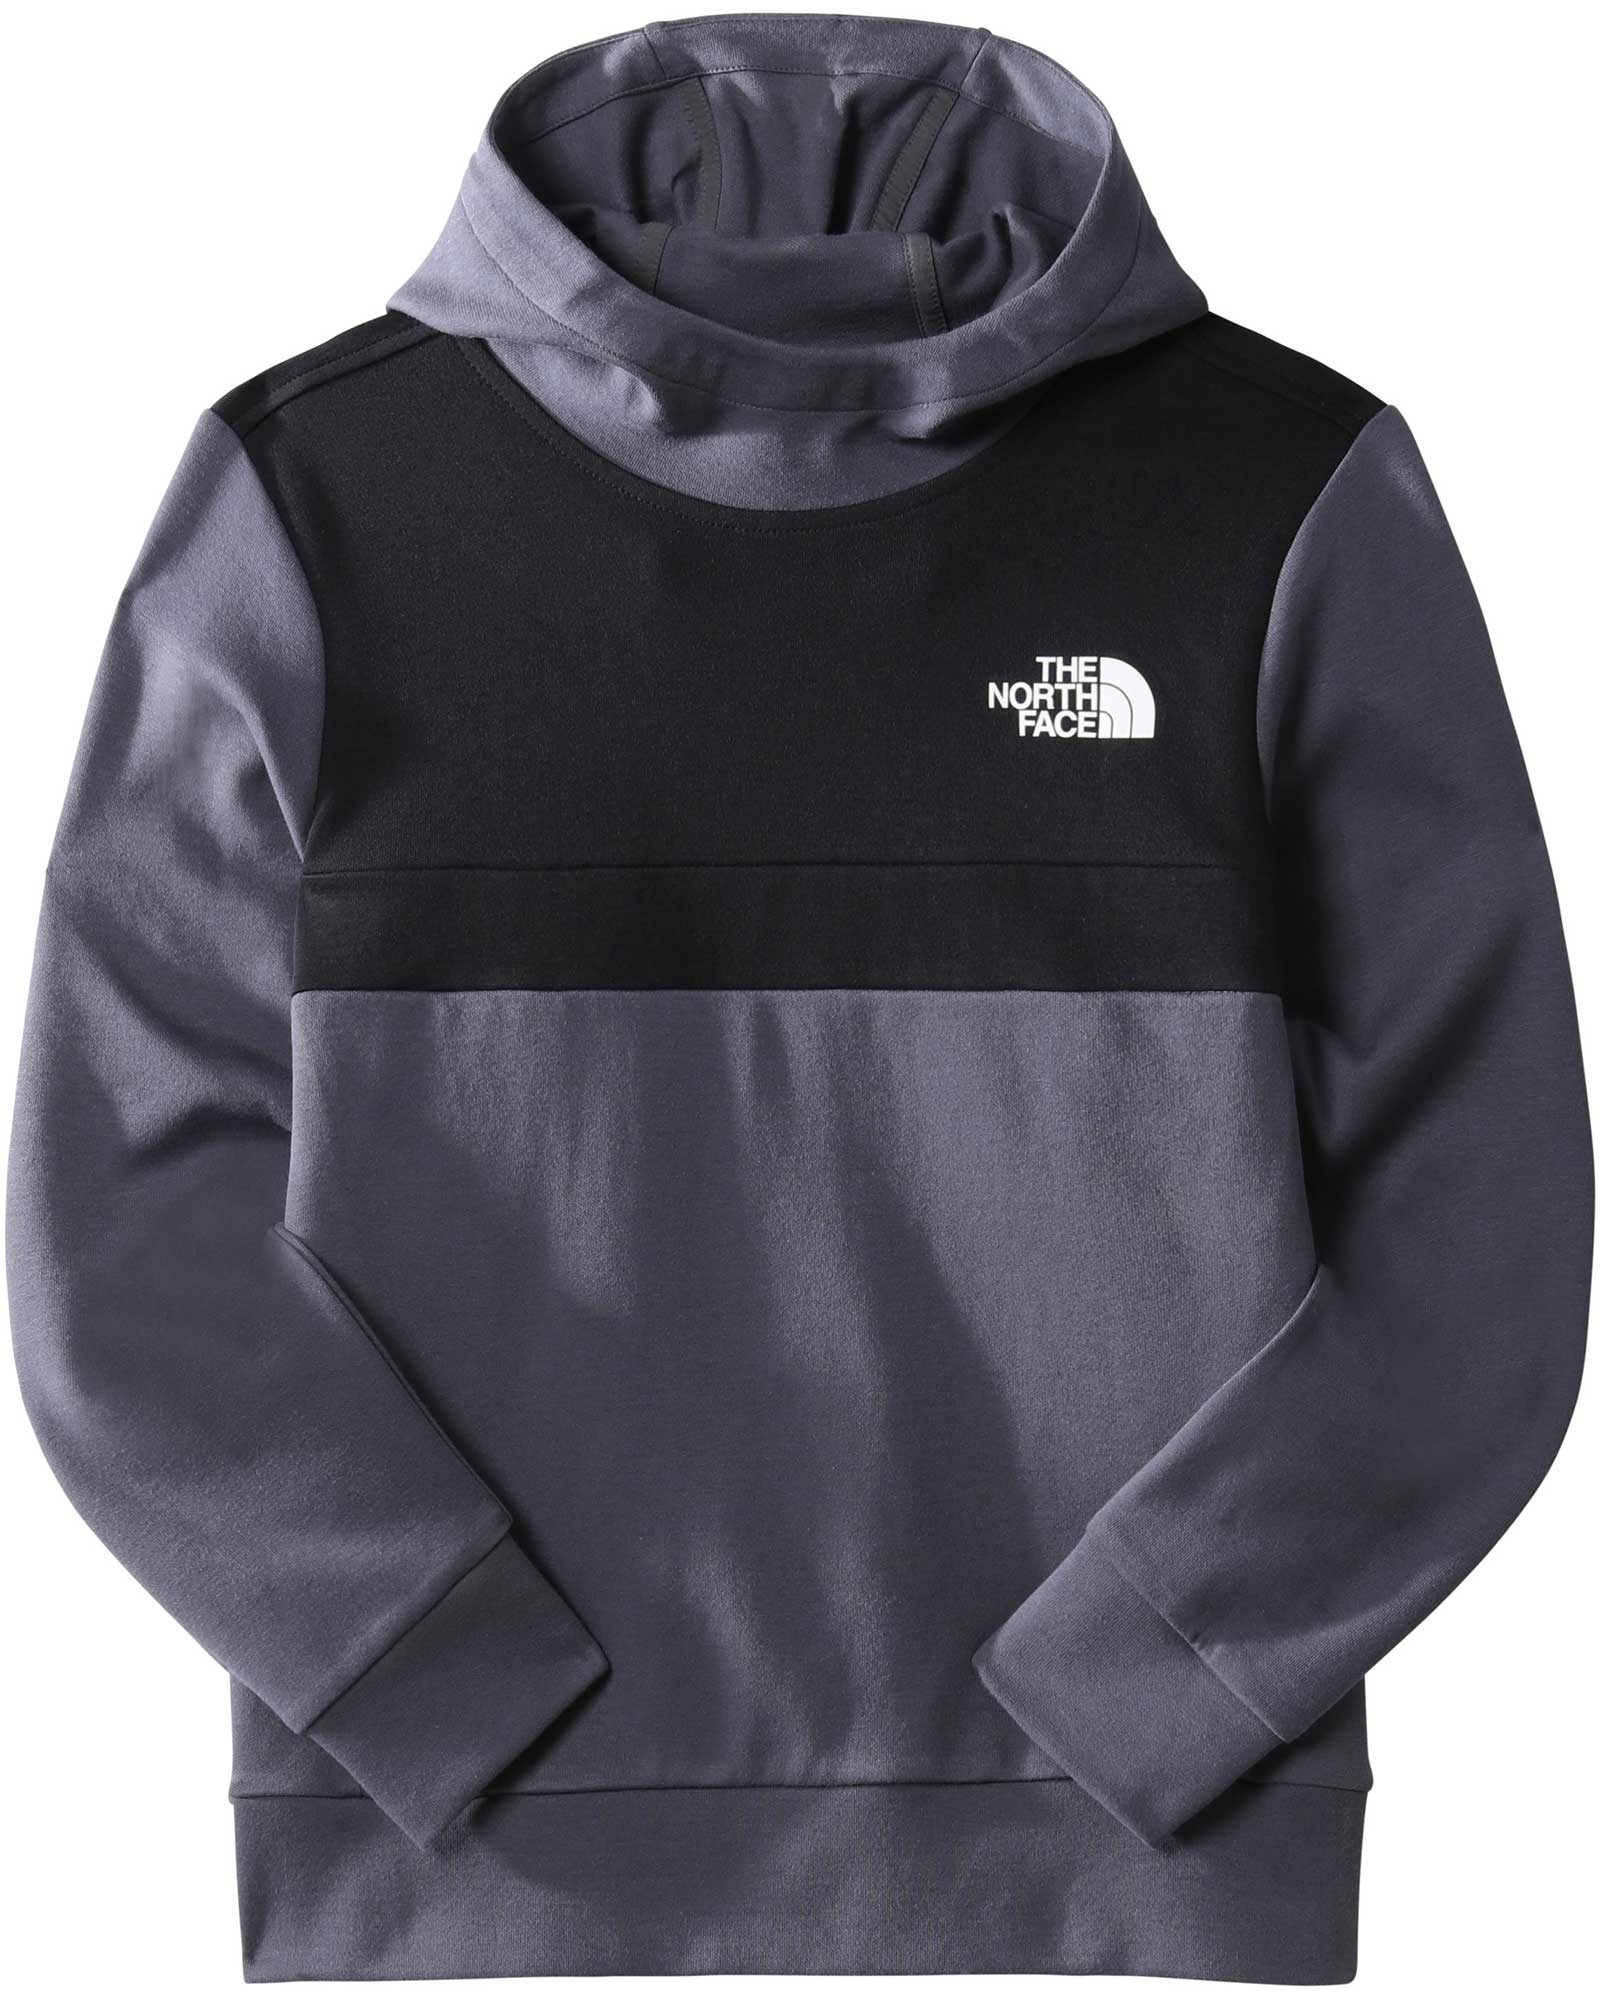 The North Face Slacker Kids Pullover Hoodie